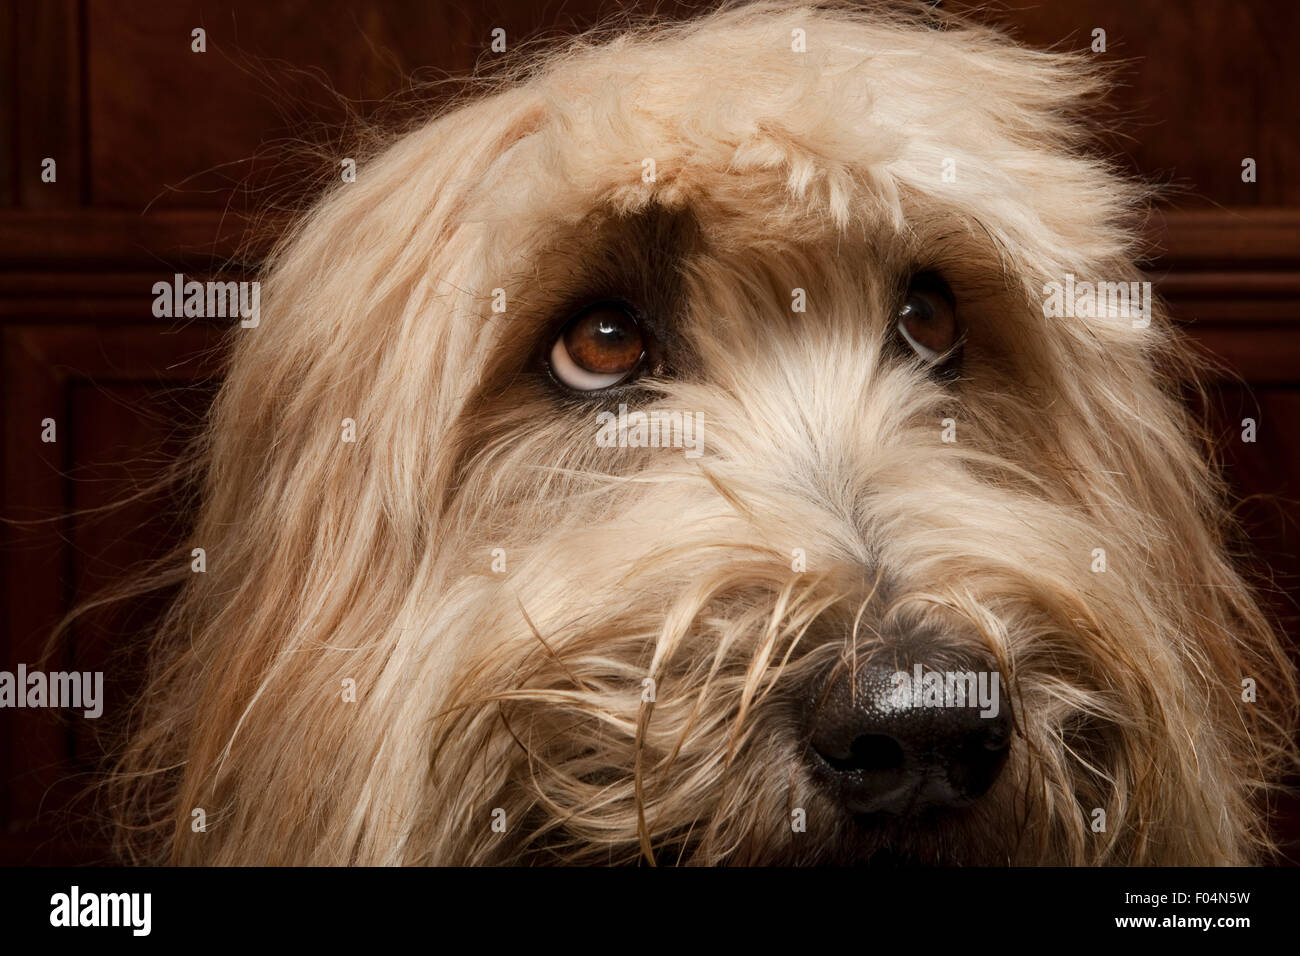 close up studio portrait of expressive Labradoodle dog face with cute haircut Stock Photo